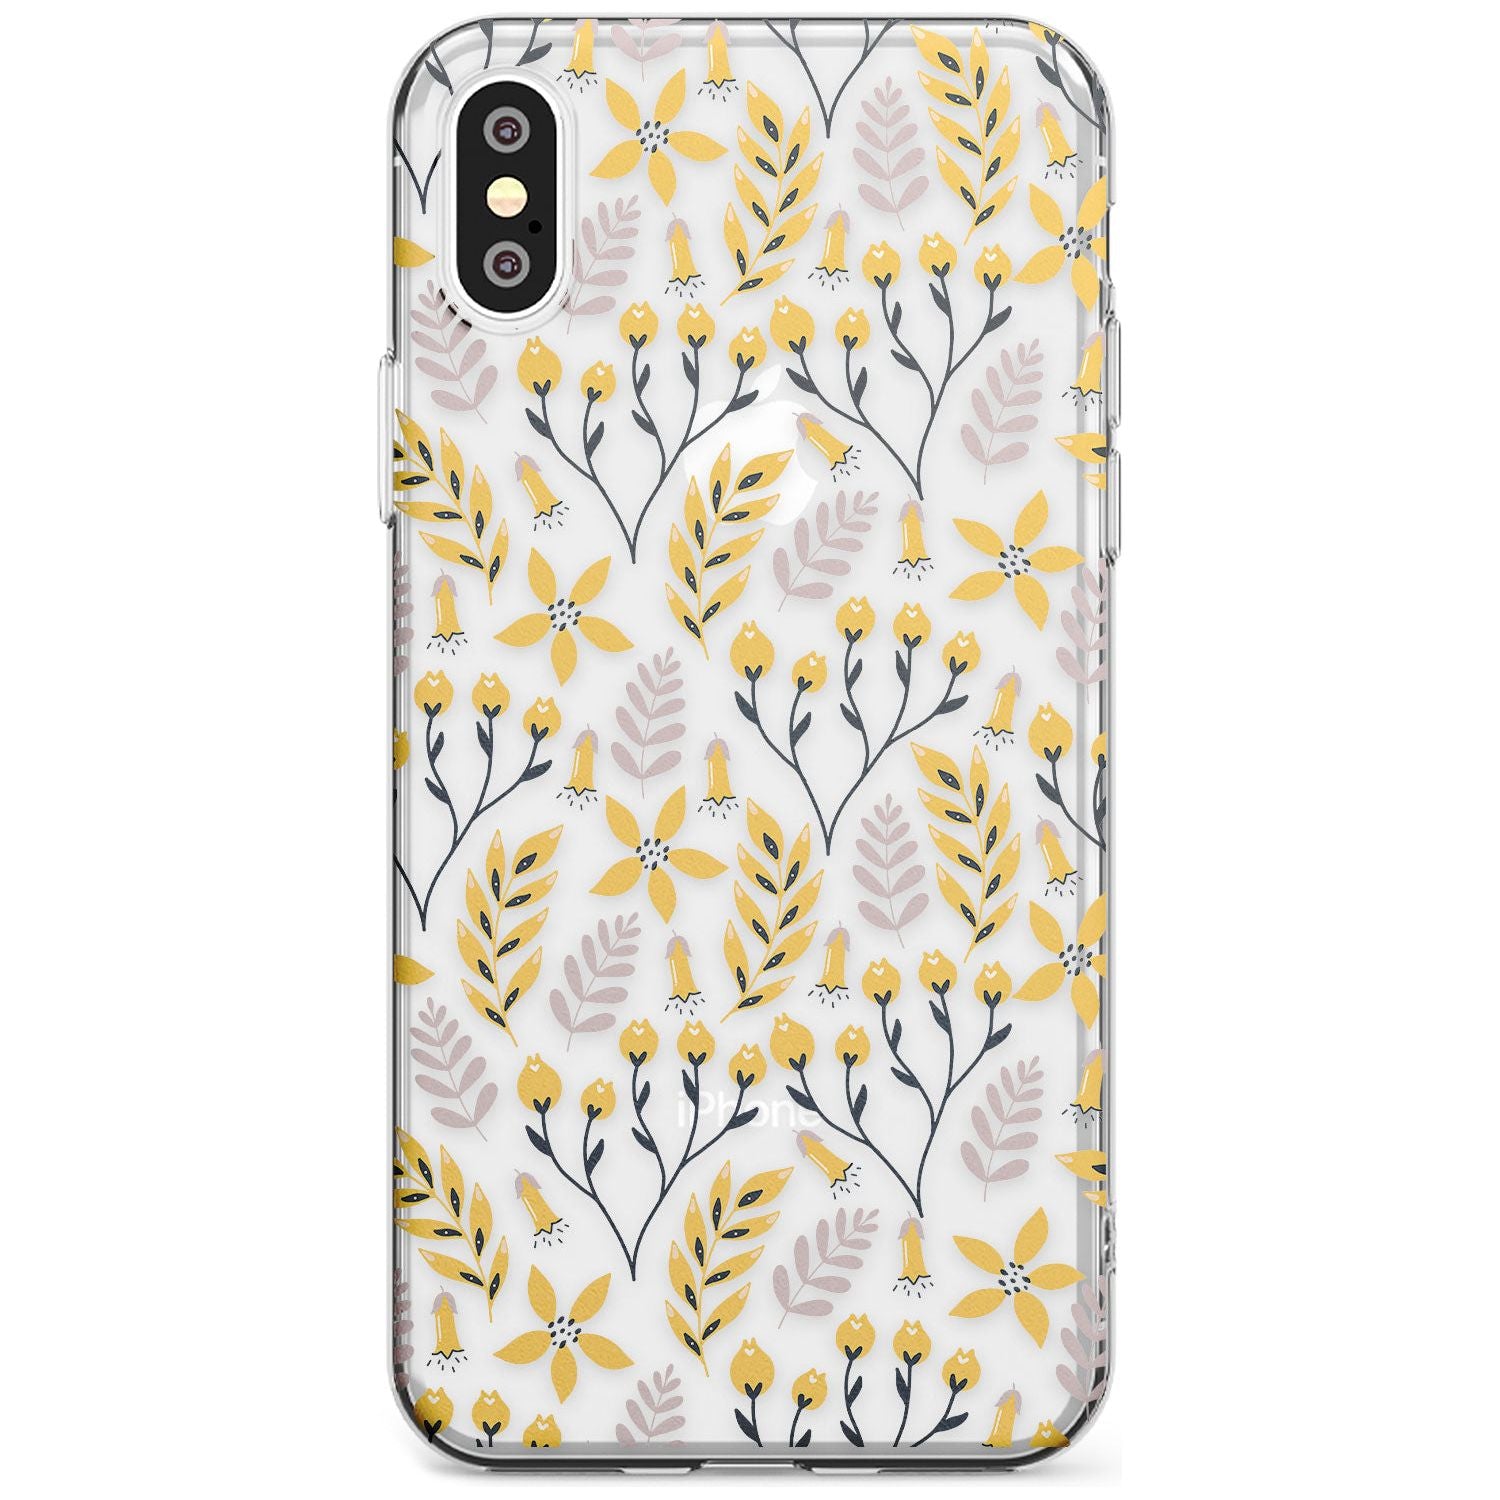 Yellow Leaves Transparent Floral Slim TPU Phone Case Warehouse X XS Max XR